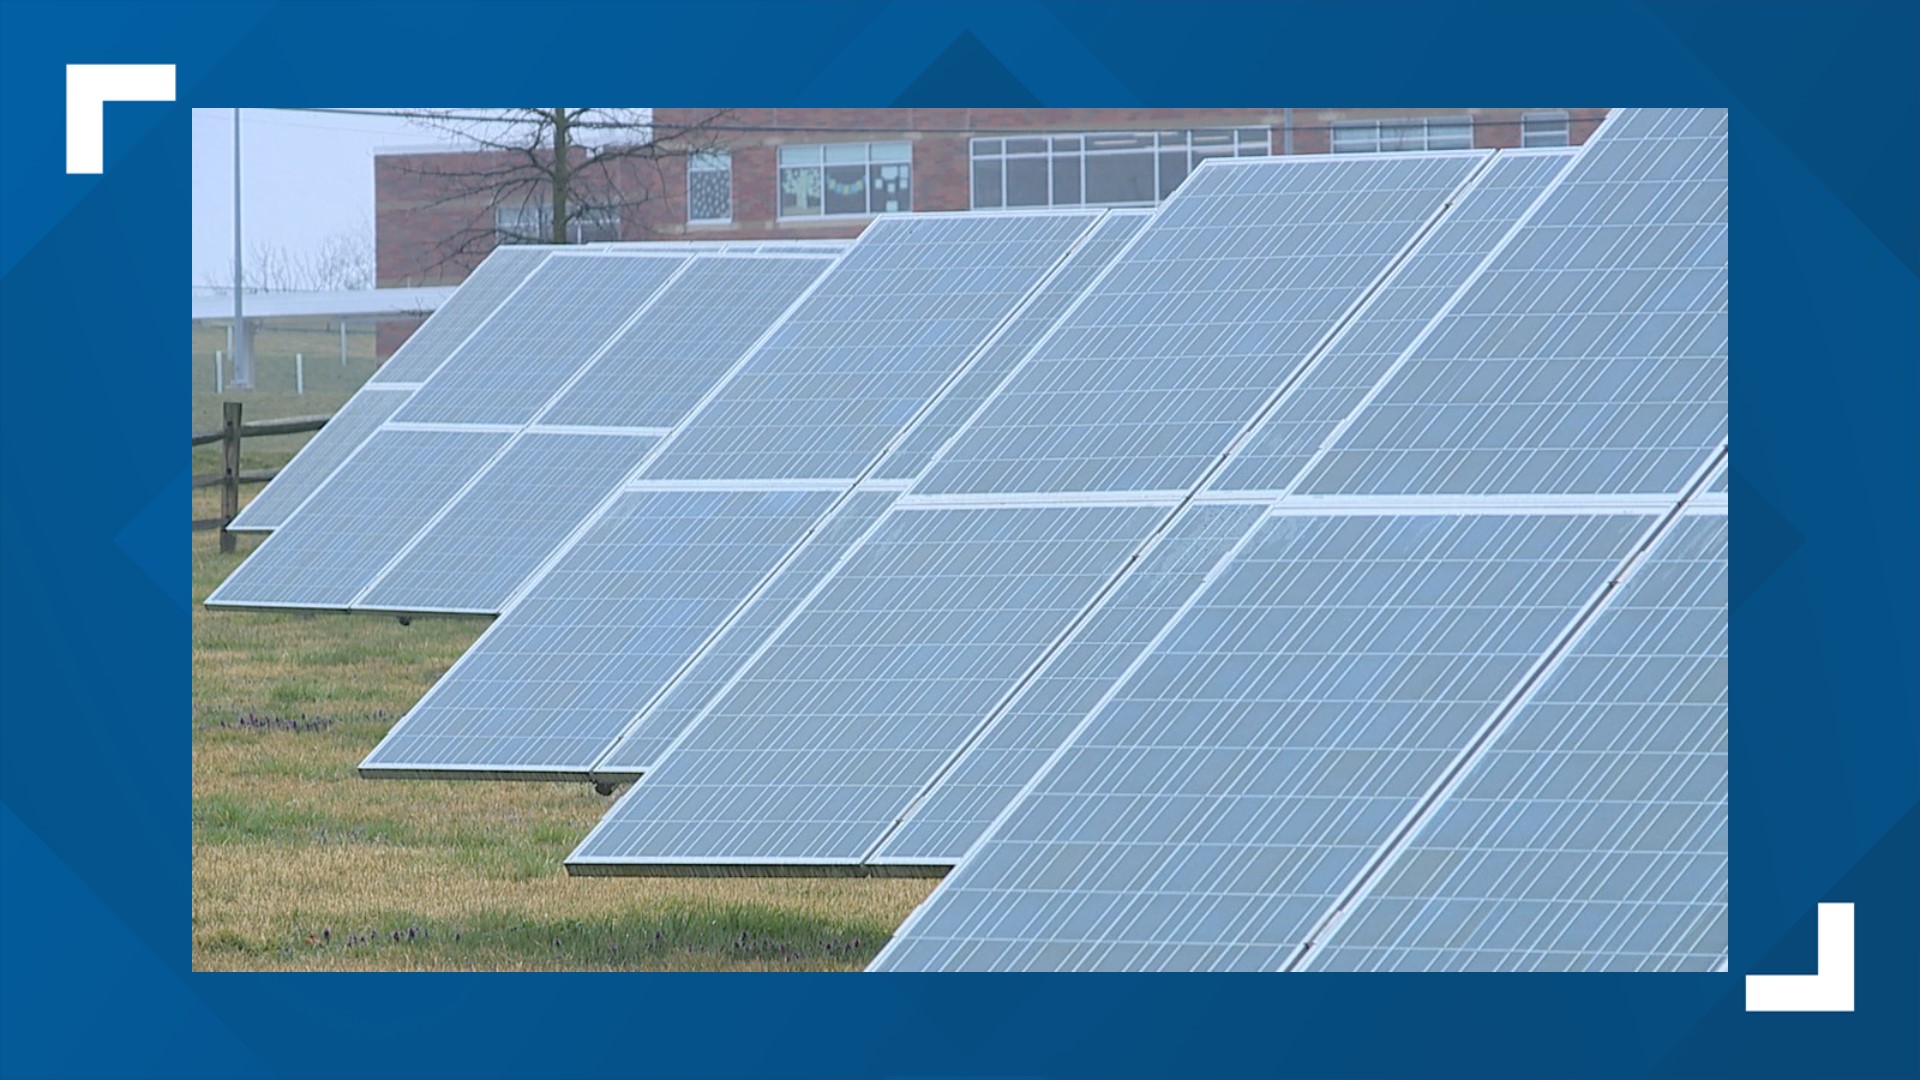 City officials in Lancaster are developing a solar energy program to reduce carbon emissions and possibly save money in the long term.